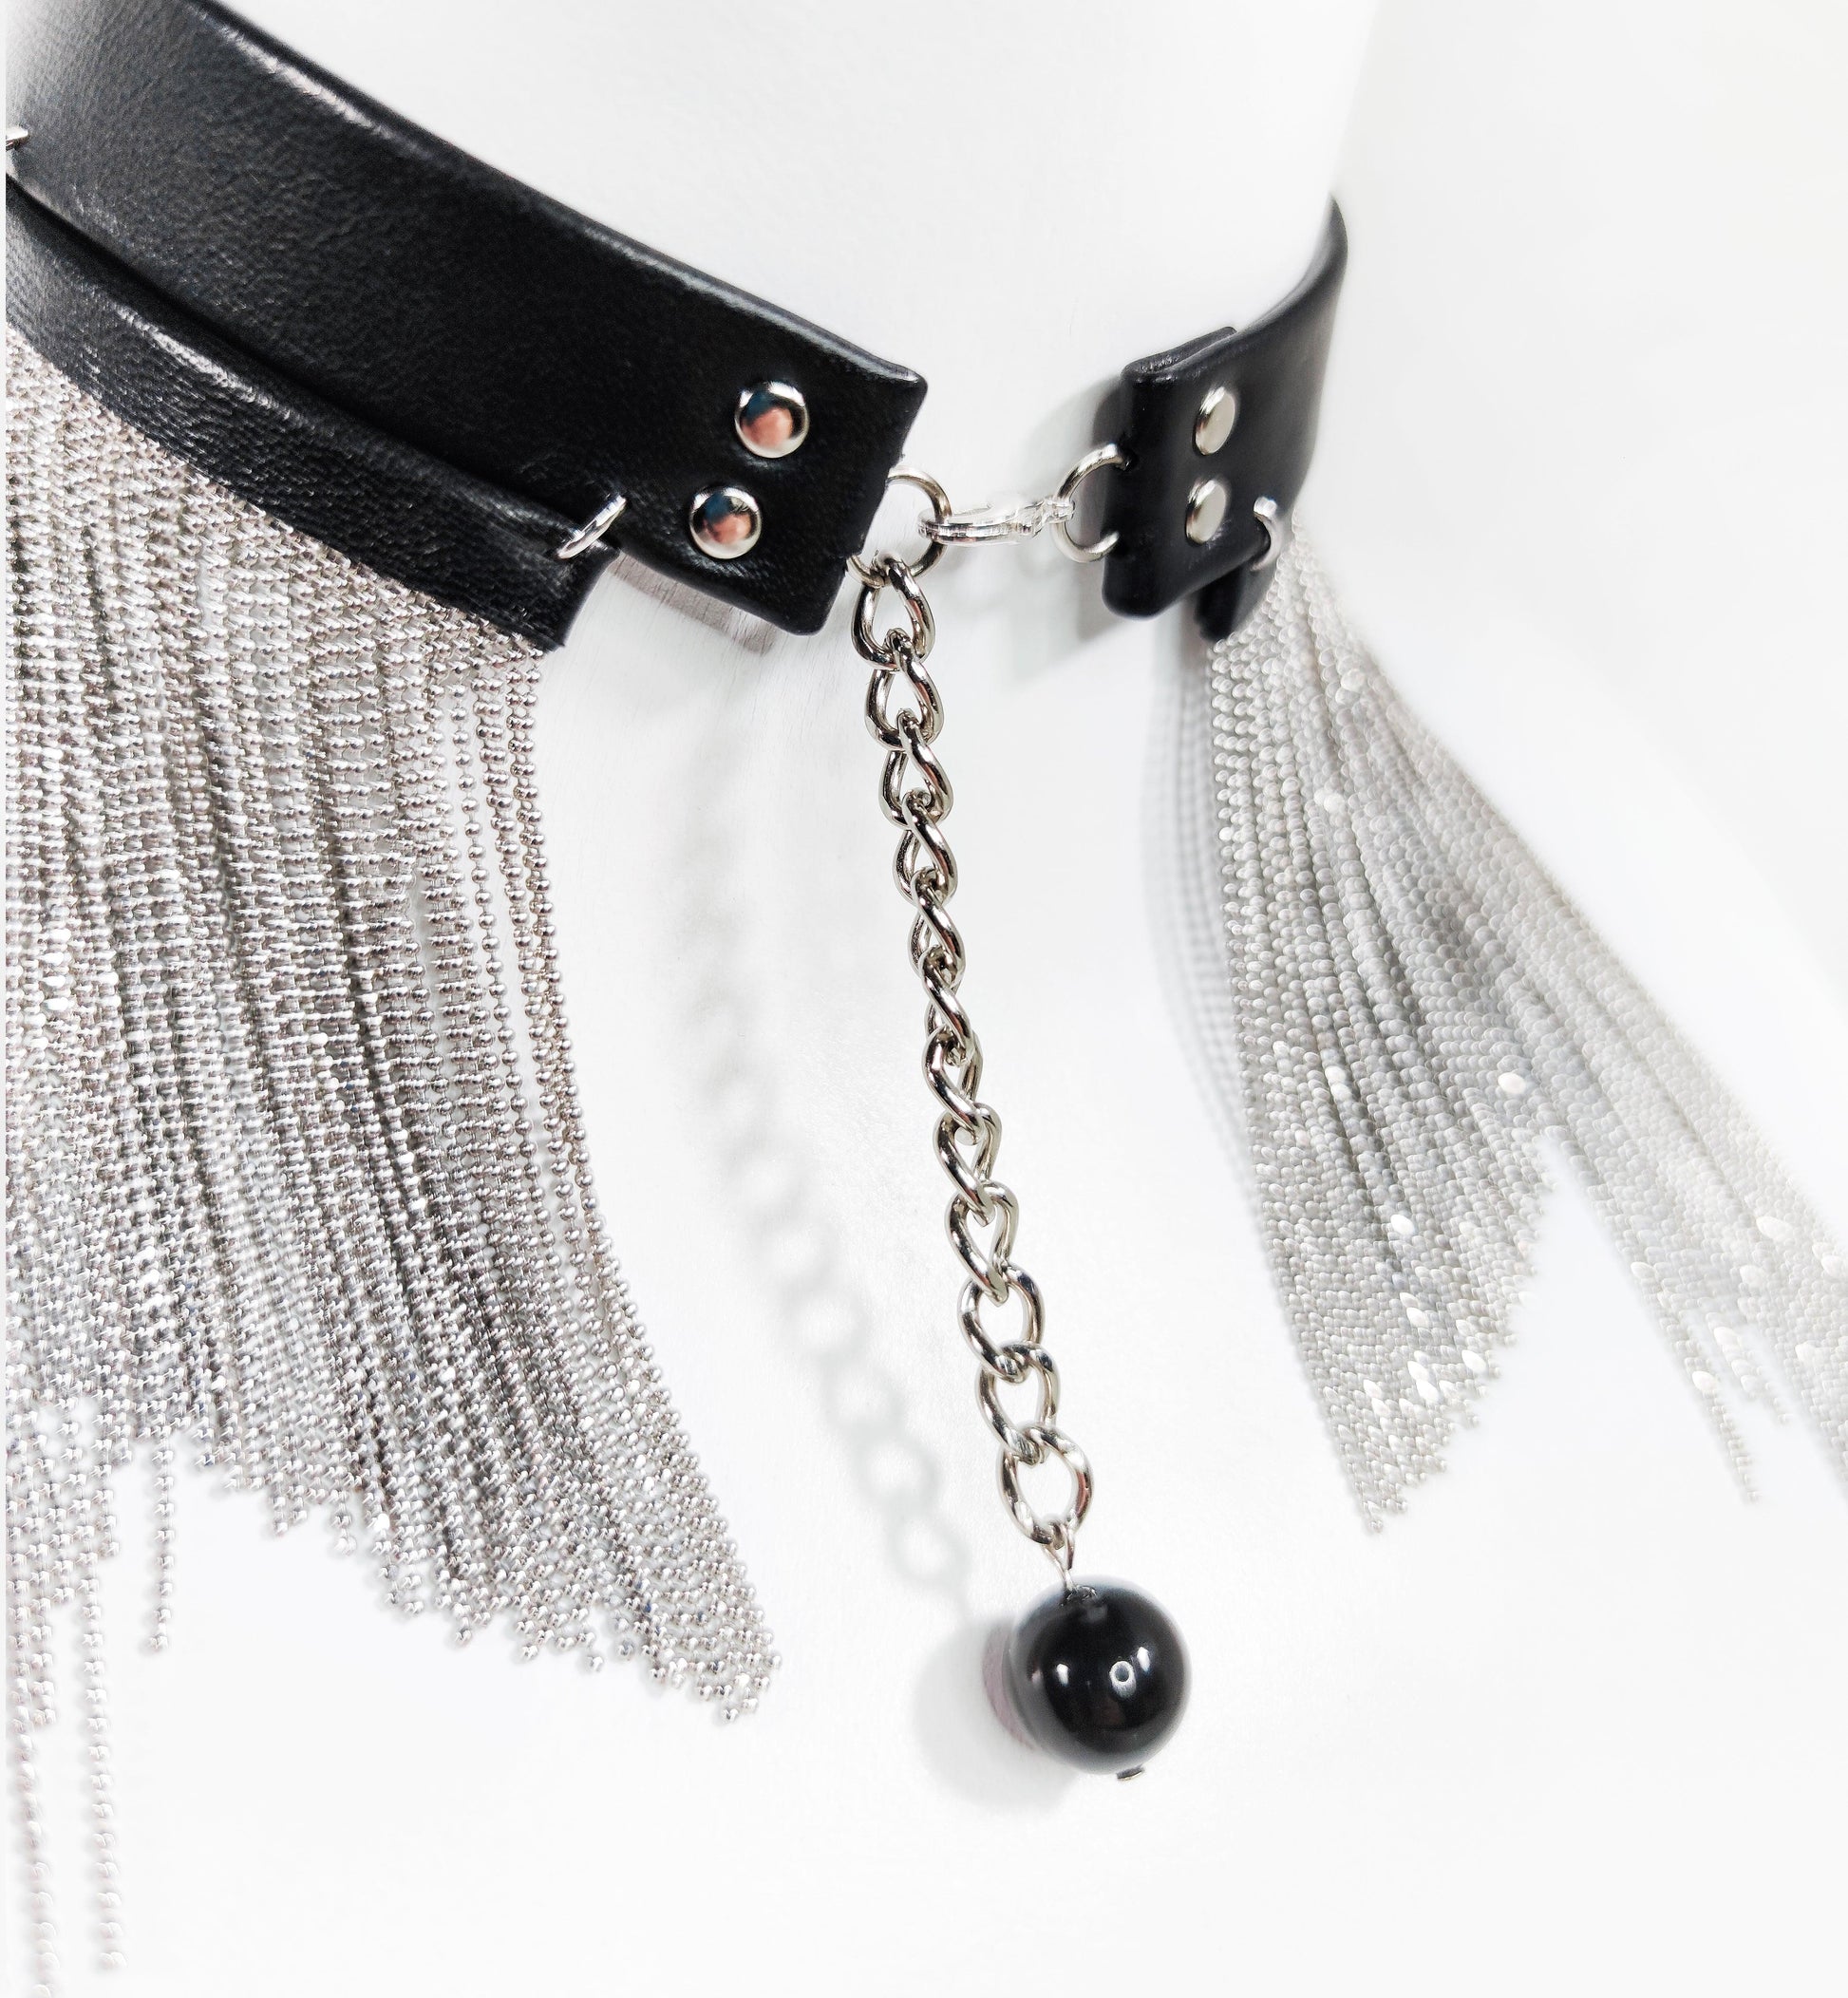 Exquisite detail of Axinia Long Leather Chocker with Chains showcasing the fine craftsmanship and elegant design characteristic of Axinia Collection 's luxury collection.